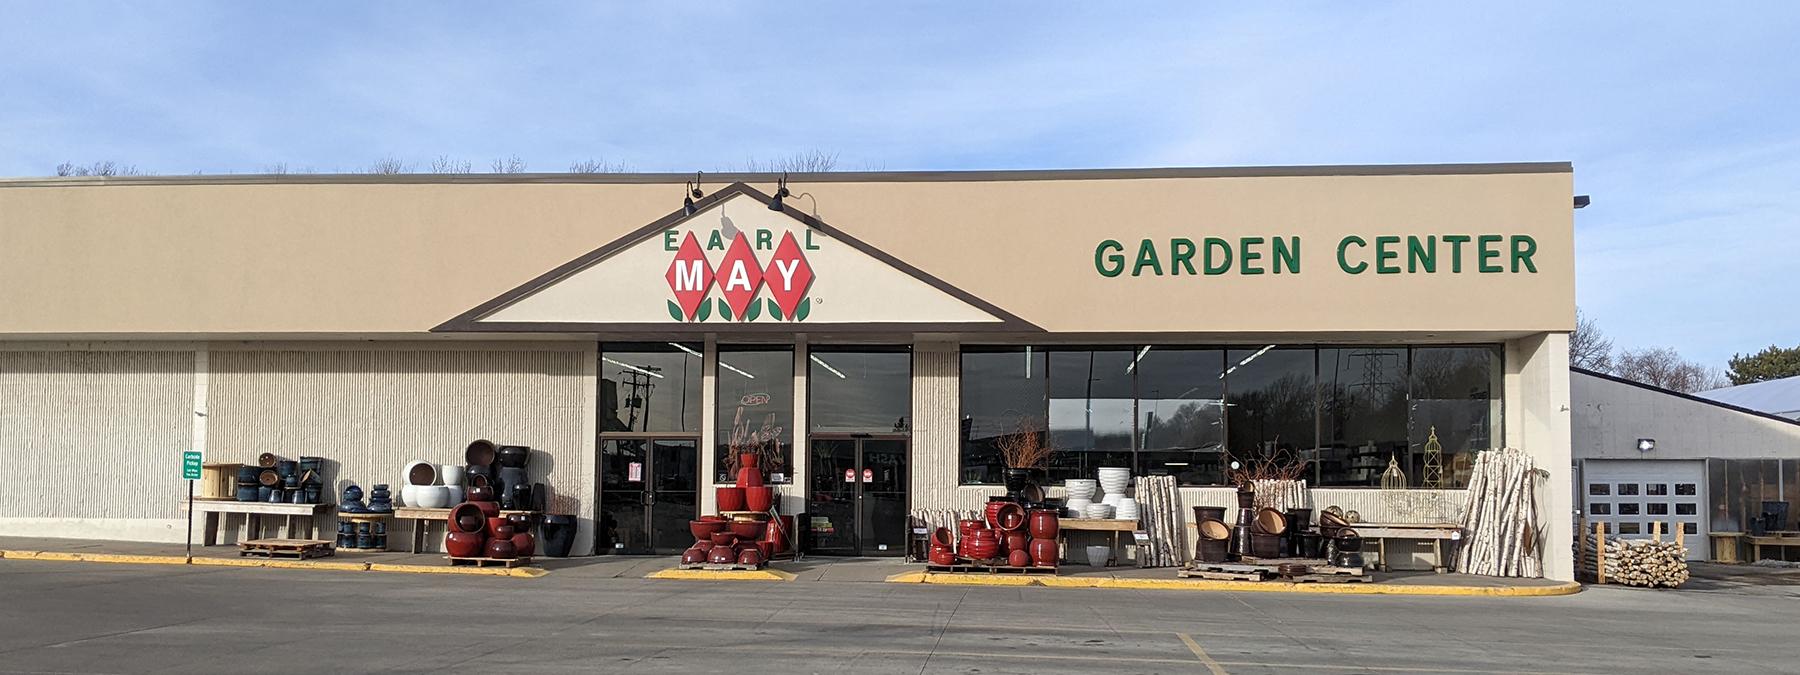 Front of the south Lincoln, Nebraska, Earl May Garden Center.